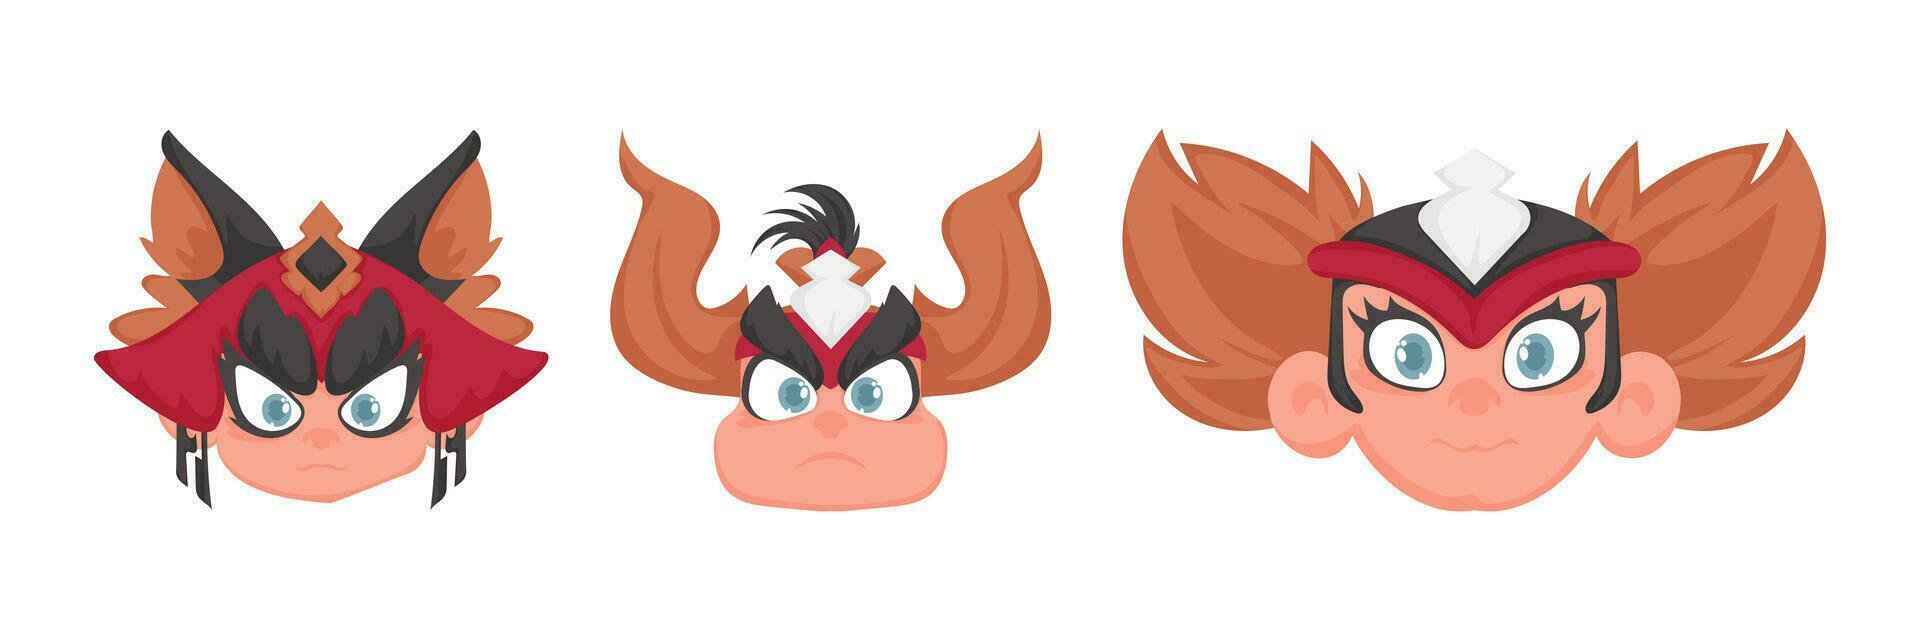 Set of funny and interesting faces of warrior girls. Cartoon style vector